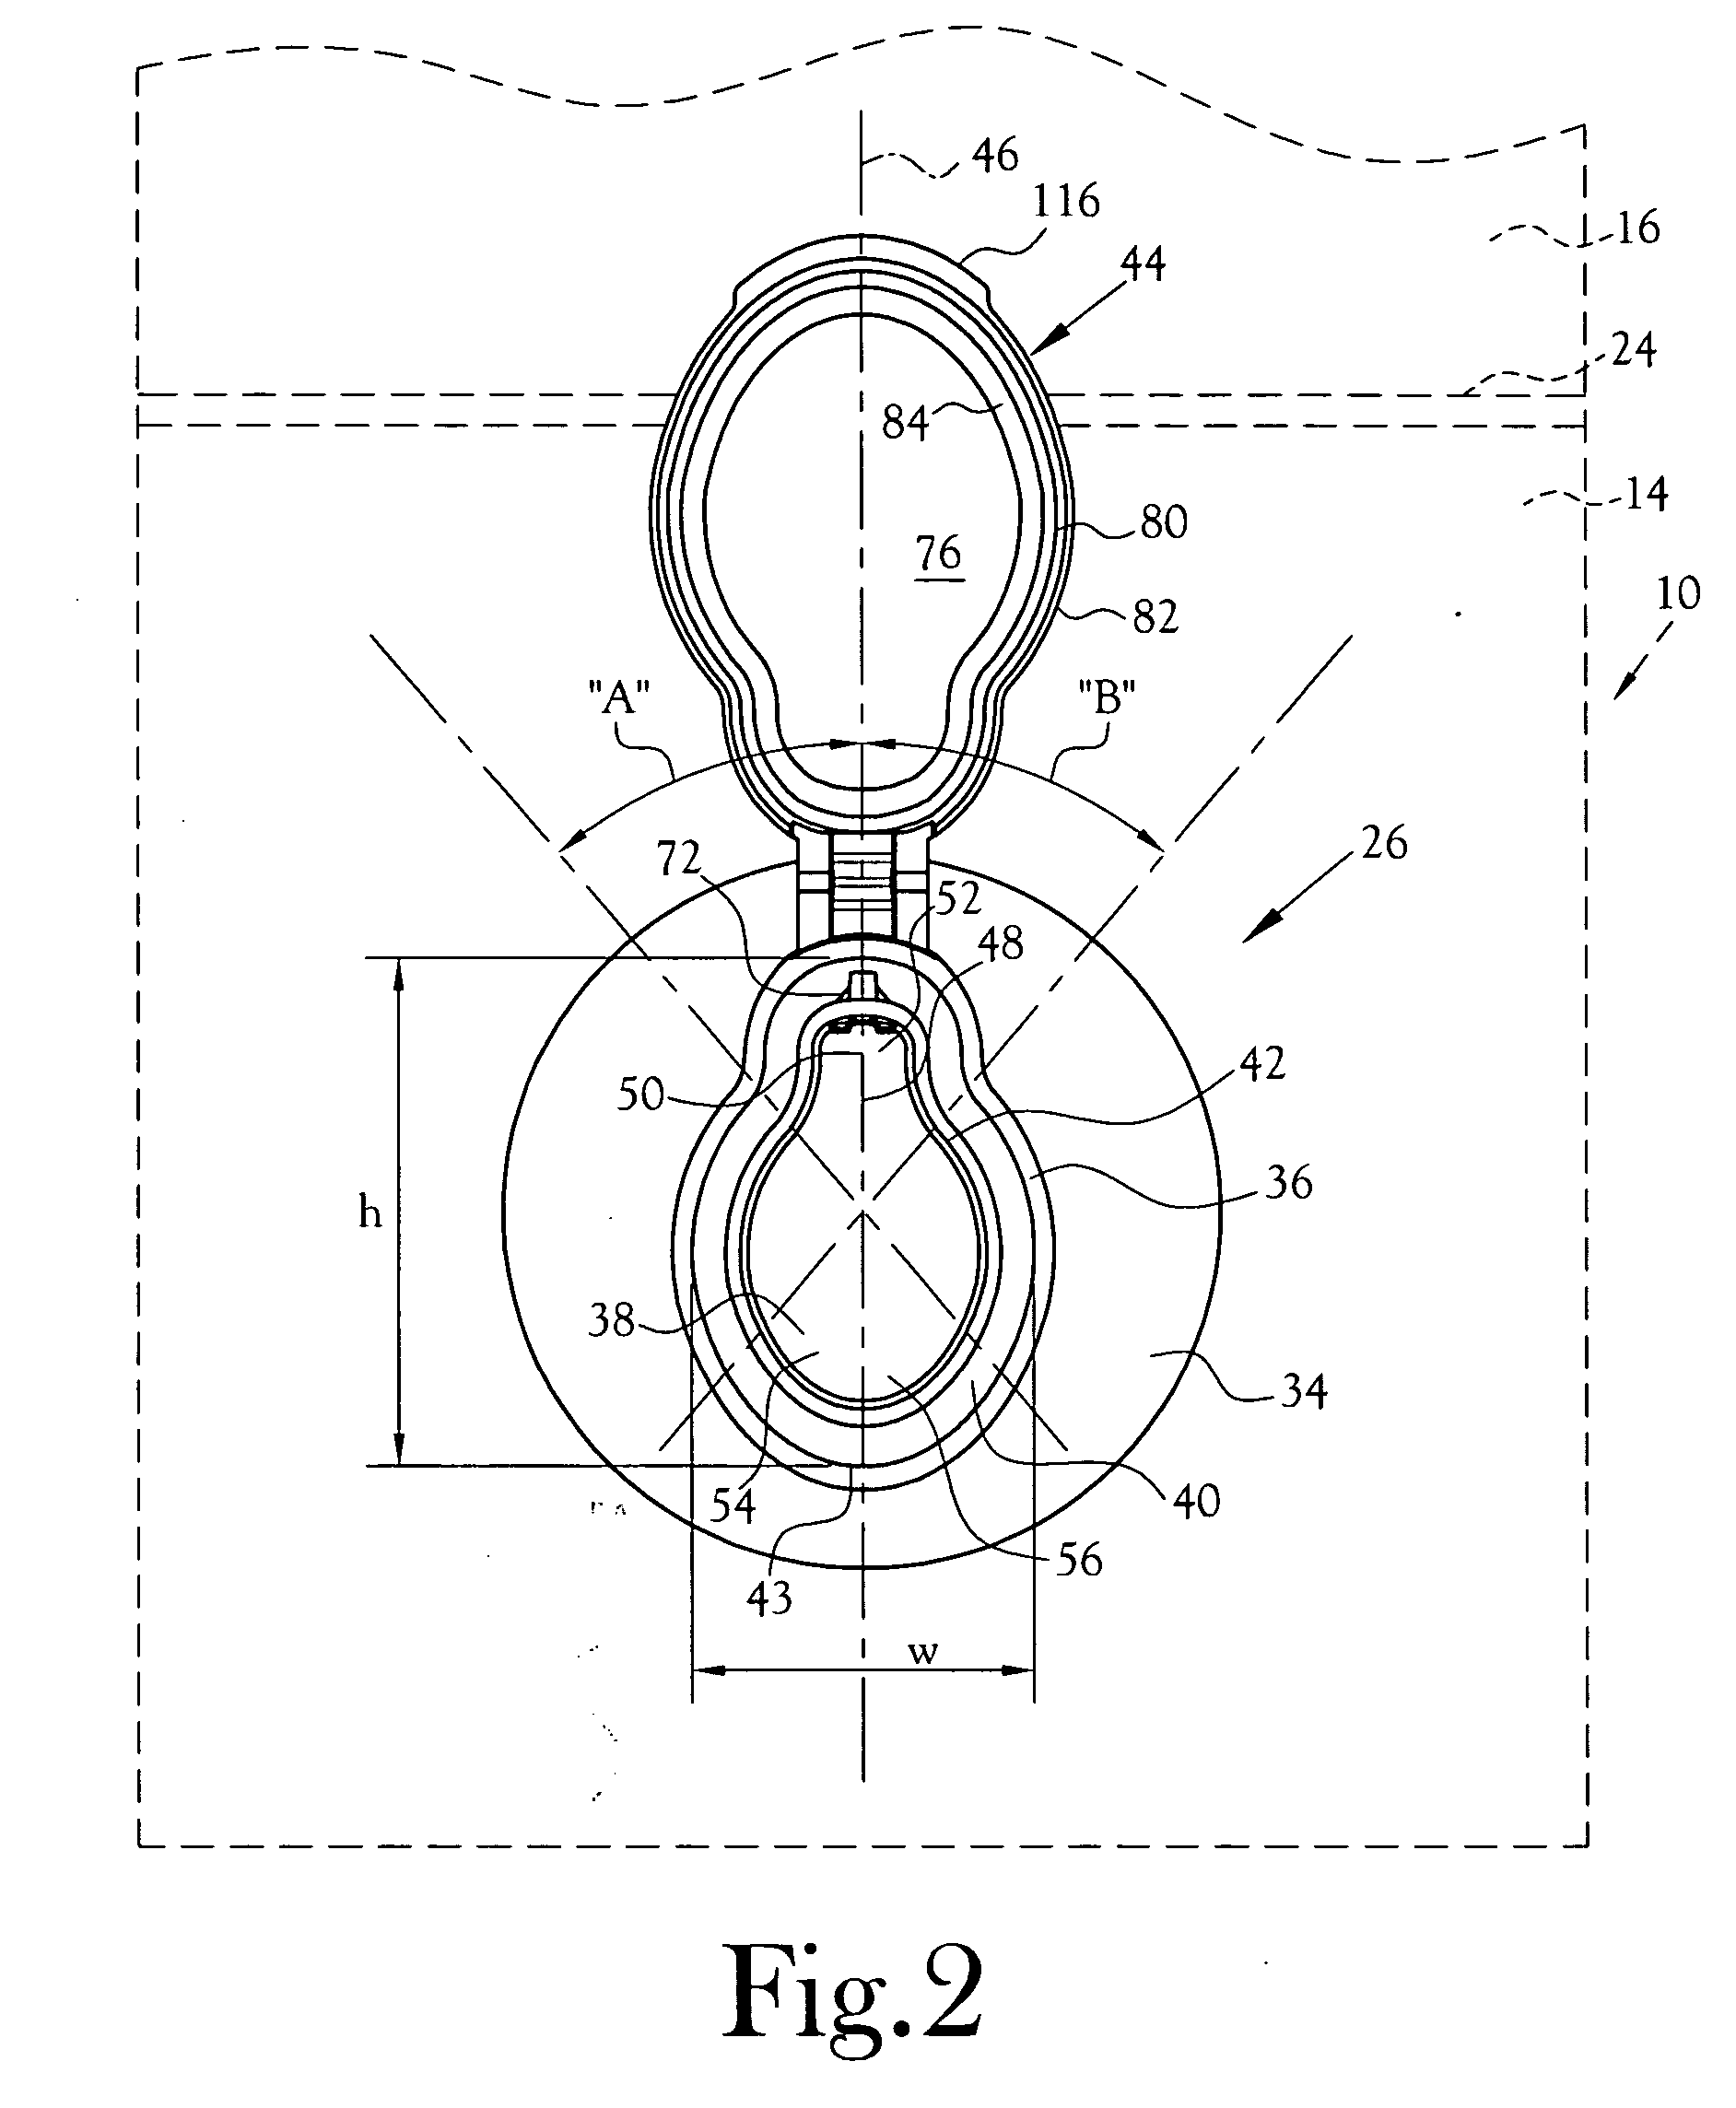 Container fitment having ellipsoidal opening